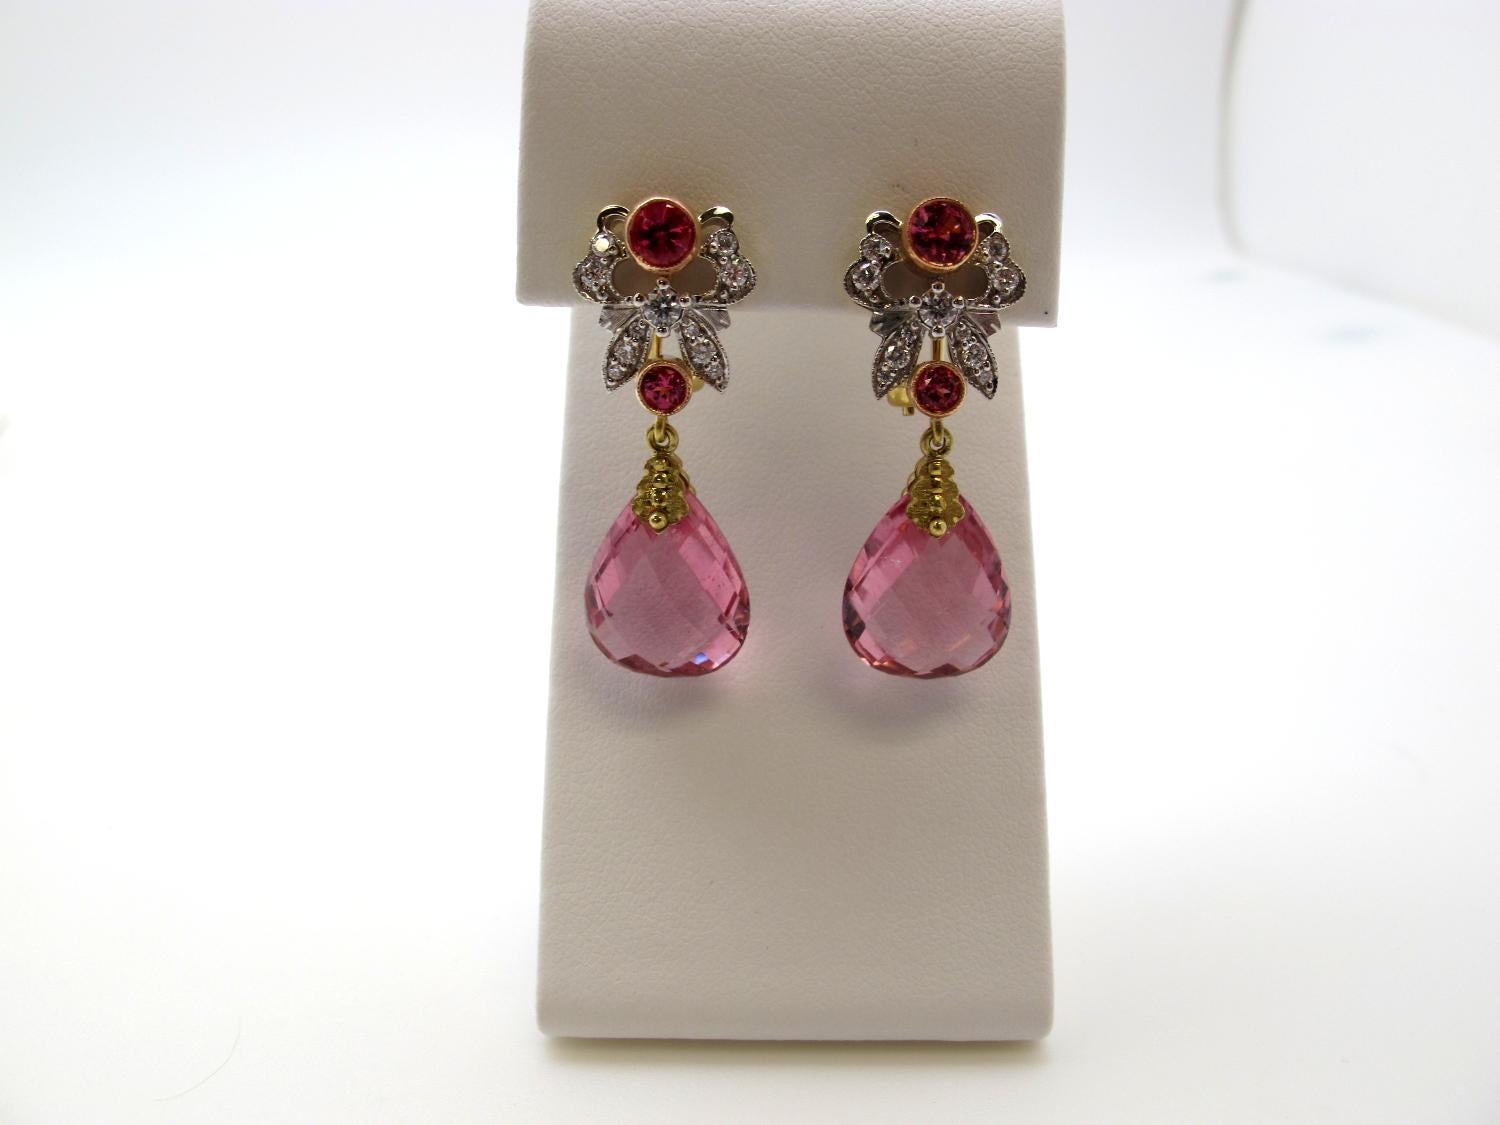 Pretty in Pink! Faceted, briolette cut, pink tourmalines are featured in these beautiful earrings. They are exceptionally rare because of their size and fine quality. The tourmalines are accented by pink spinels and diamonds. These earrings are true